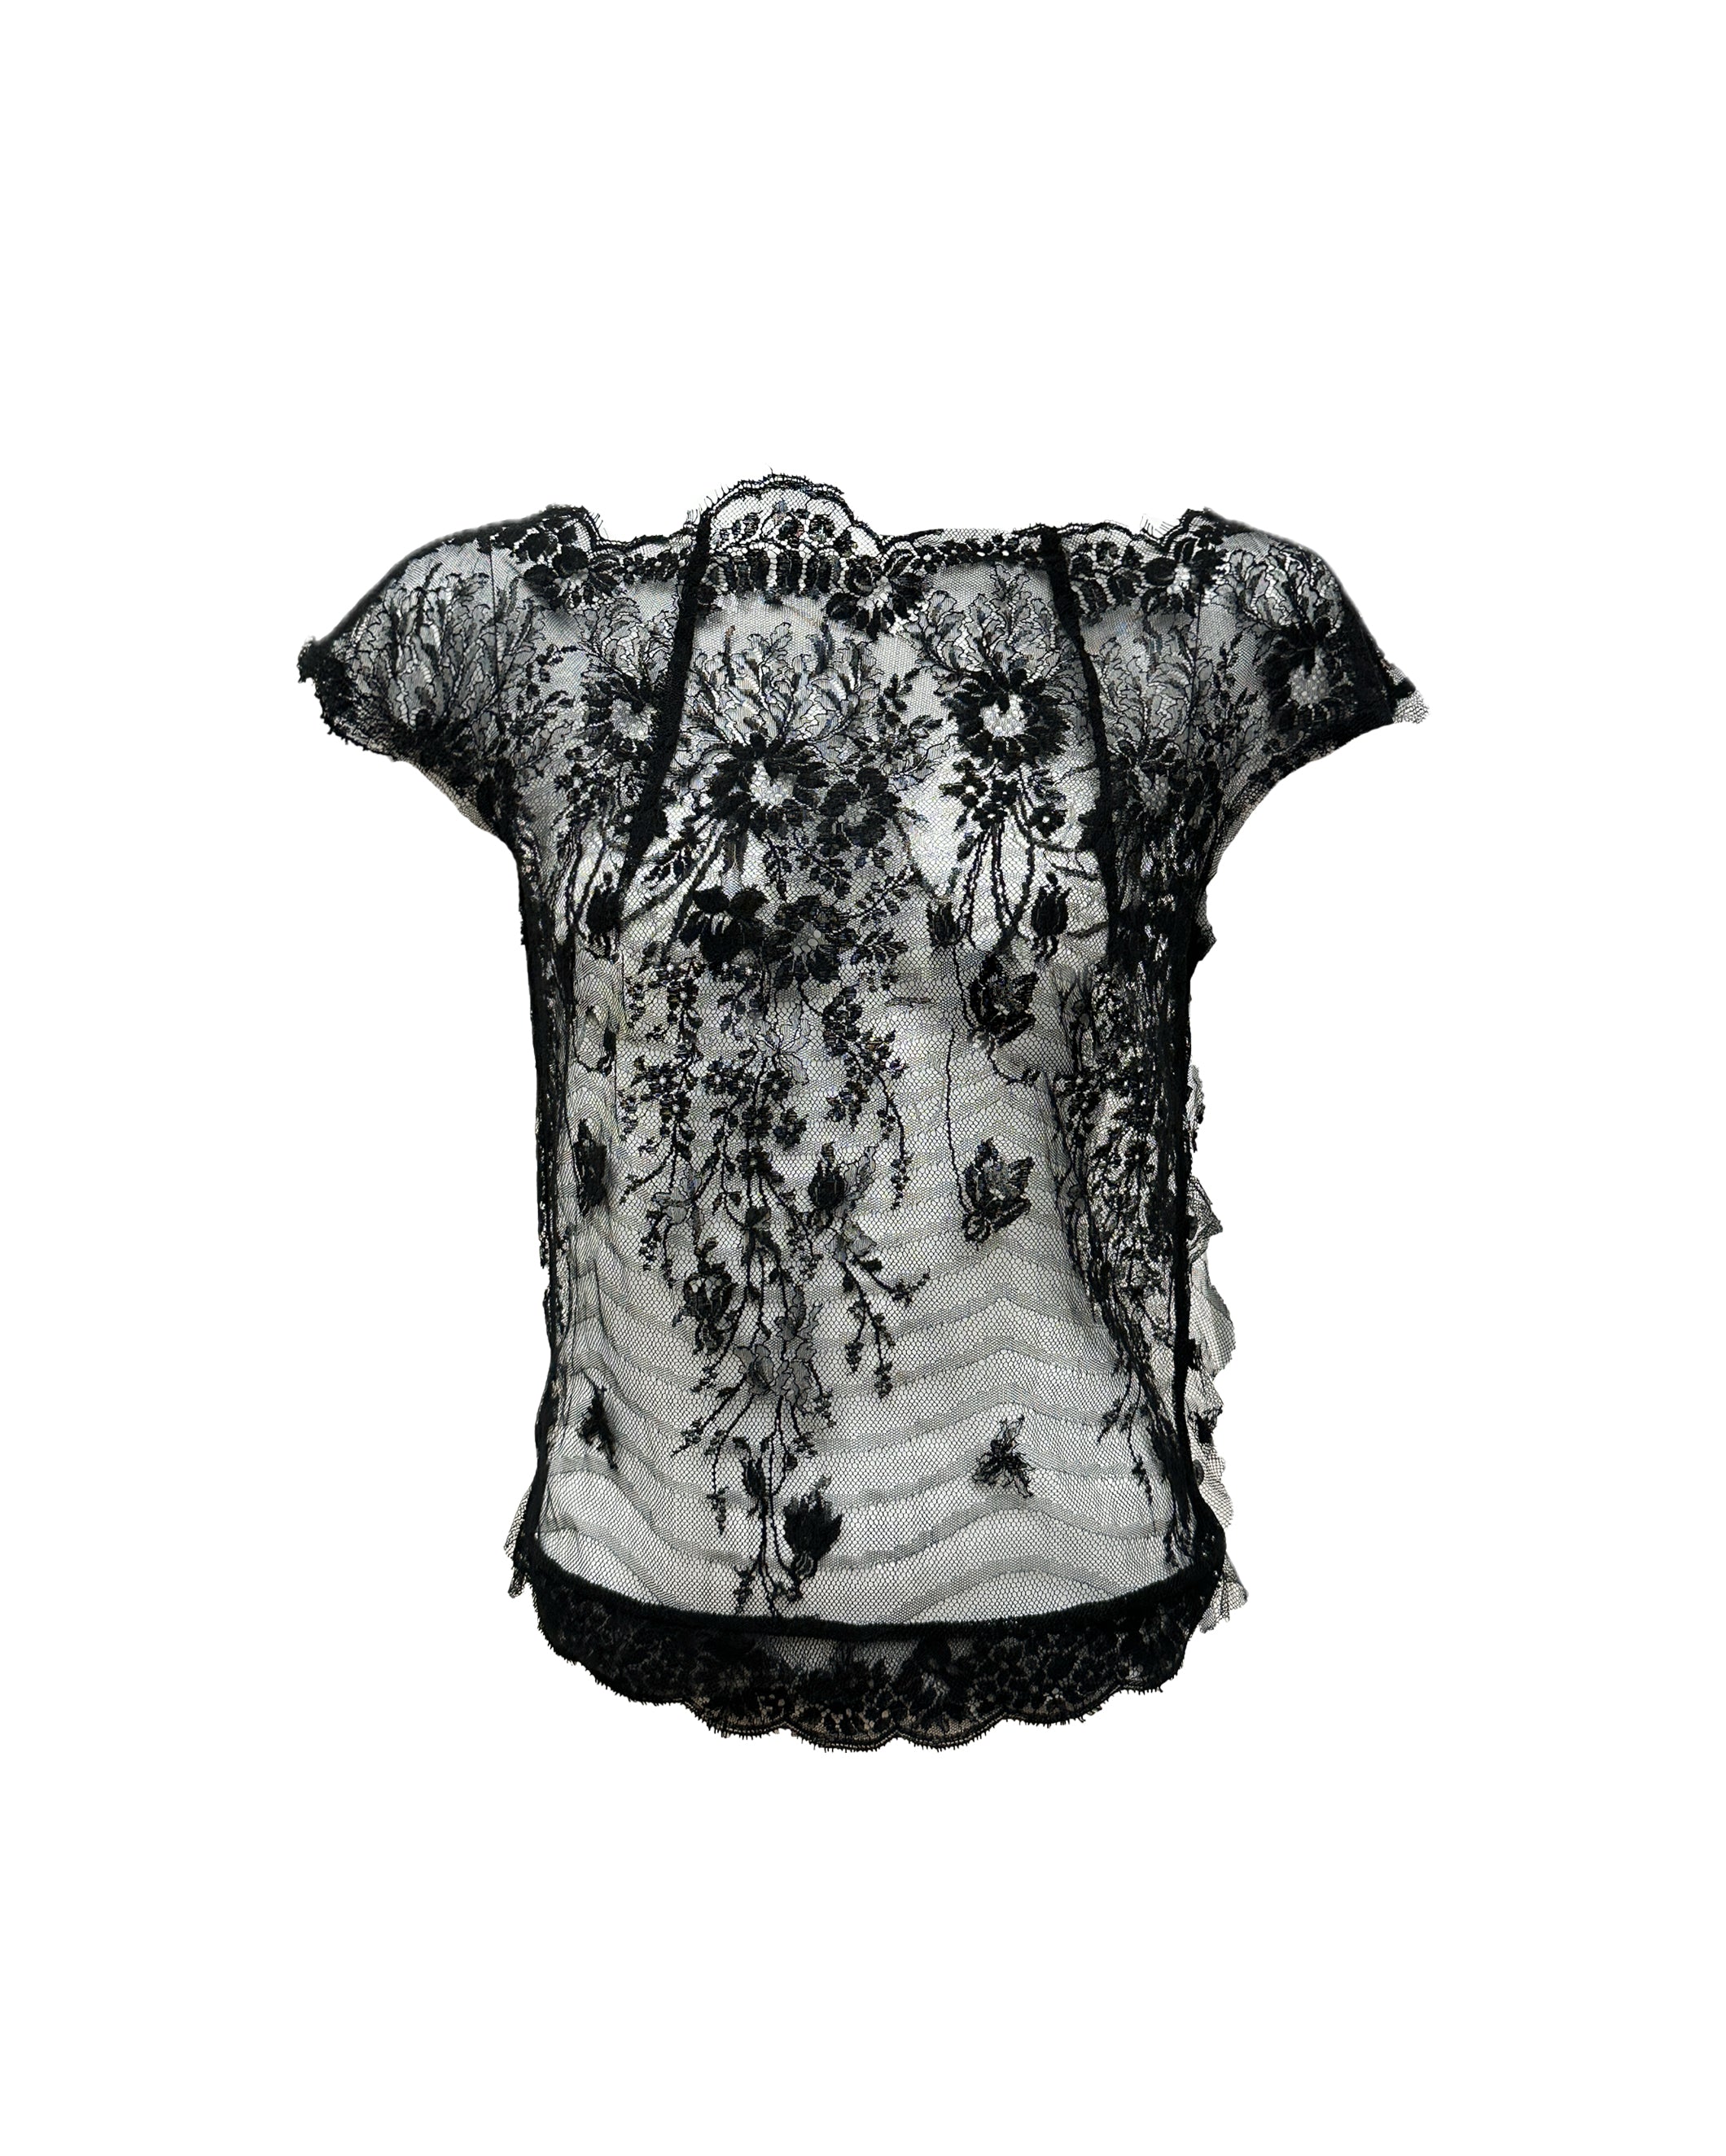 MIKI MIALY Sheer Lace Top S